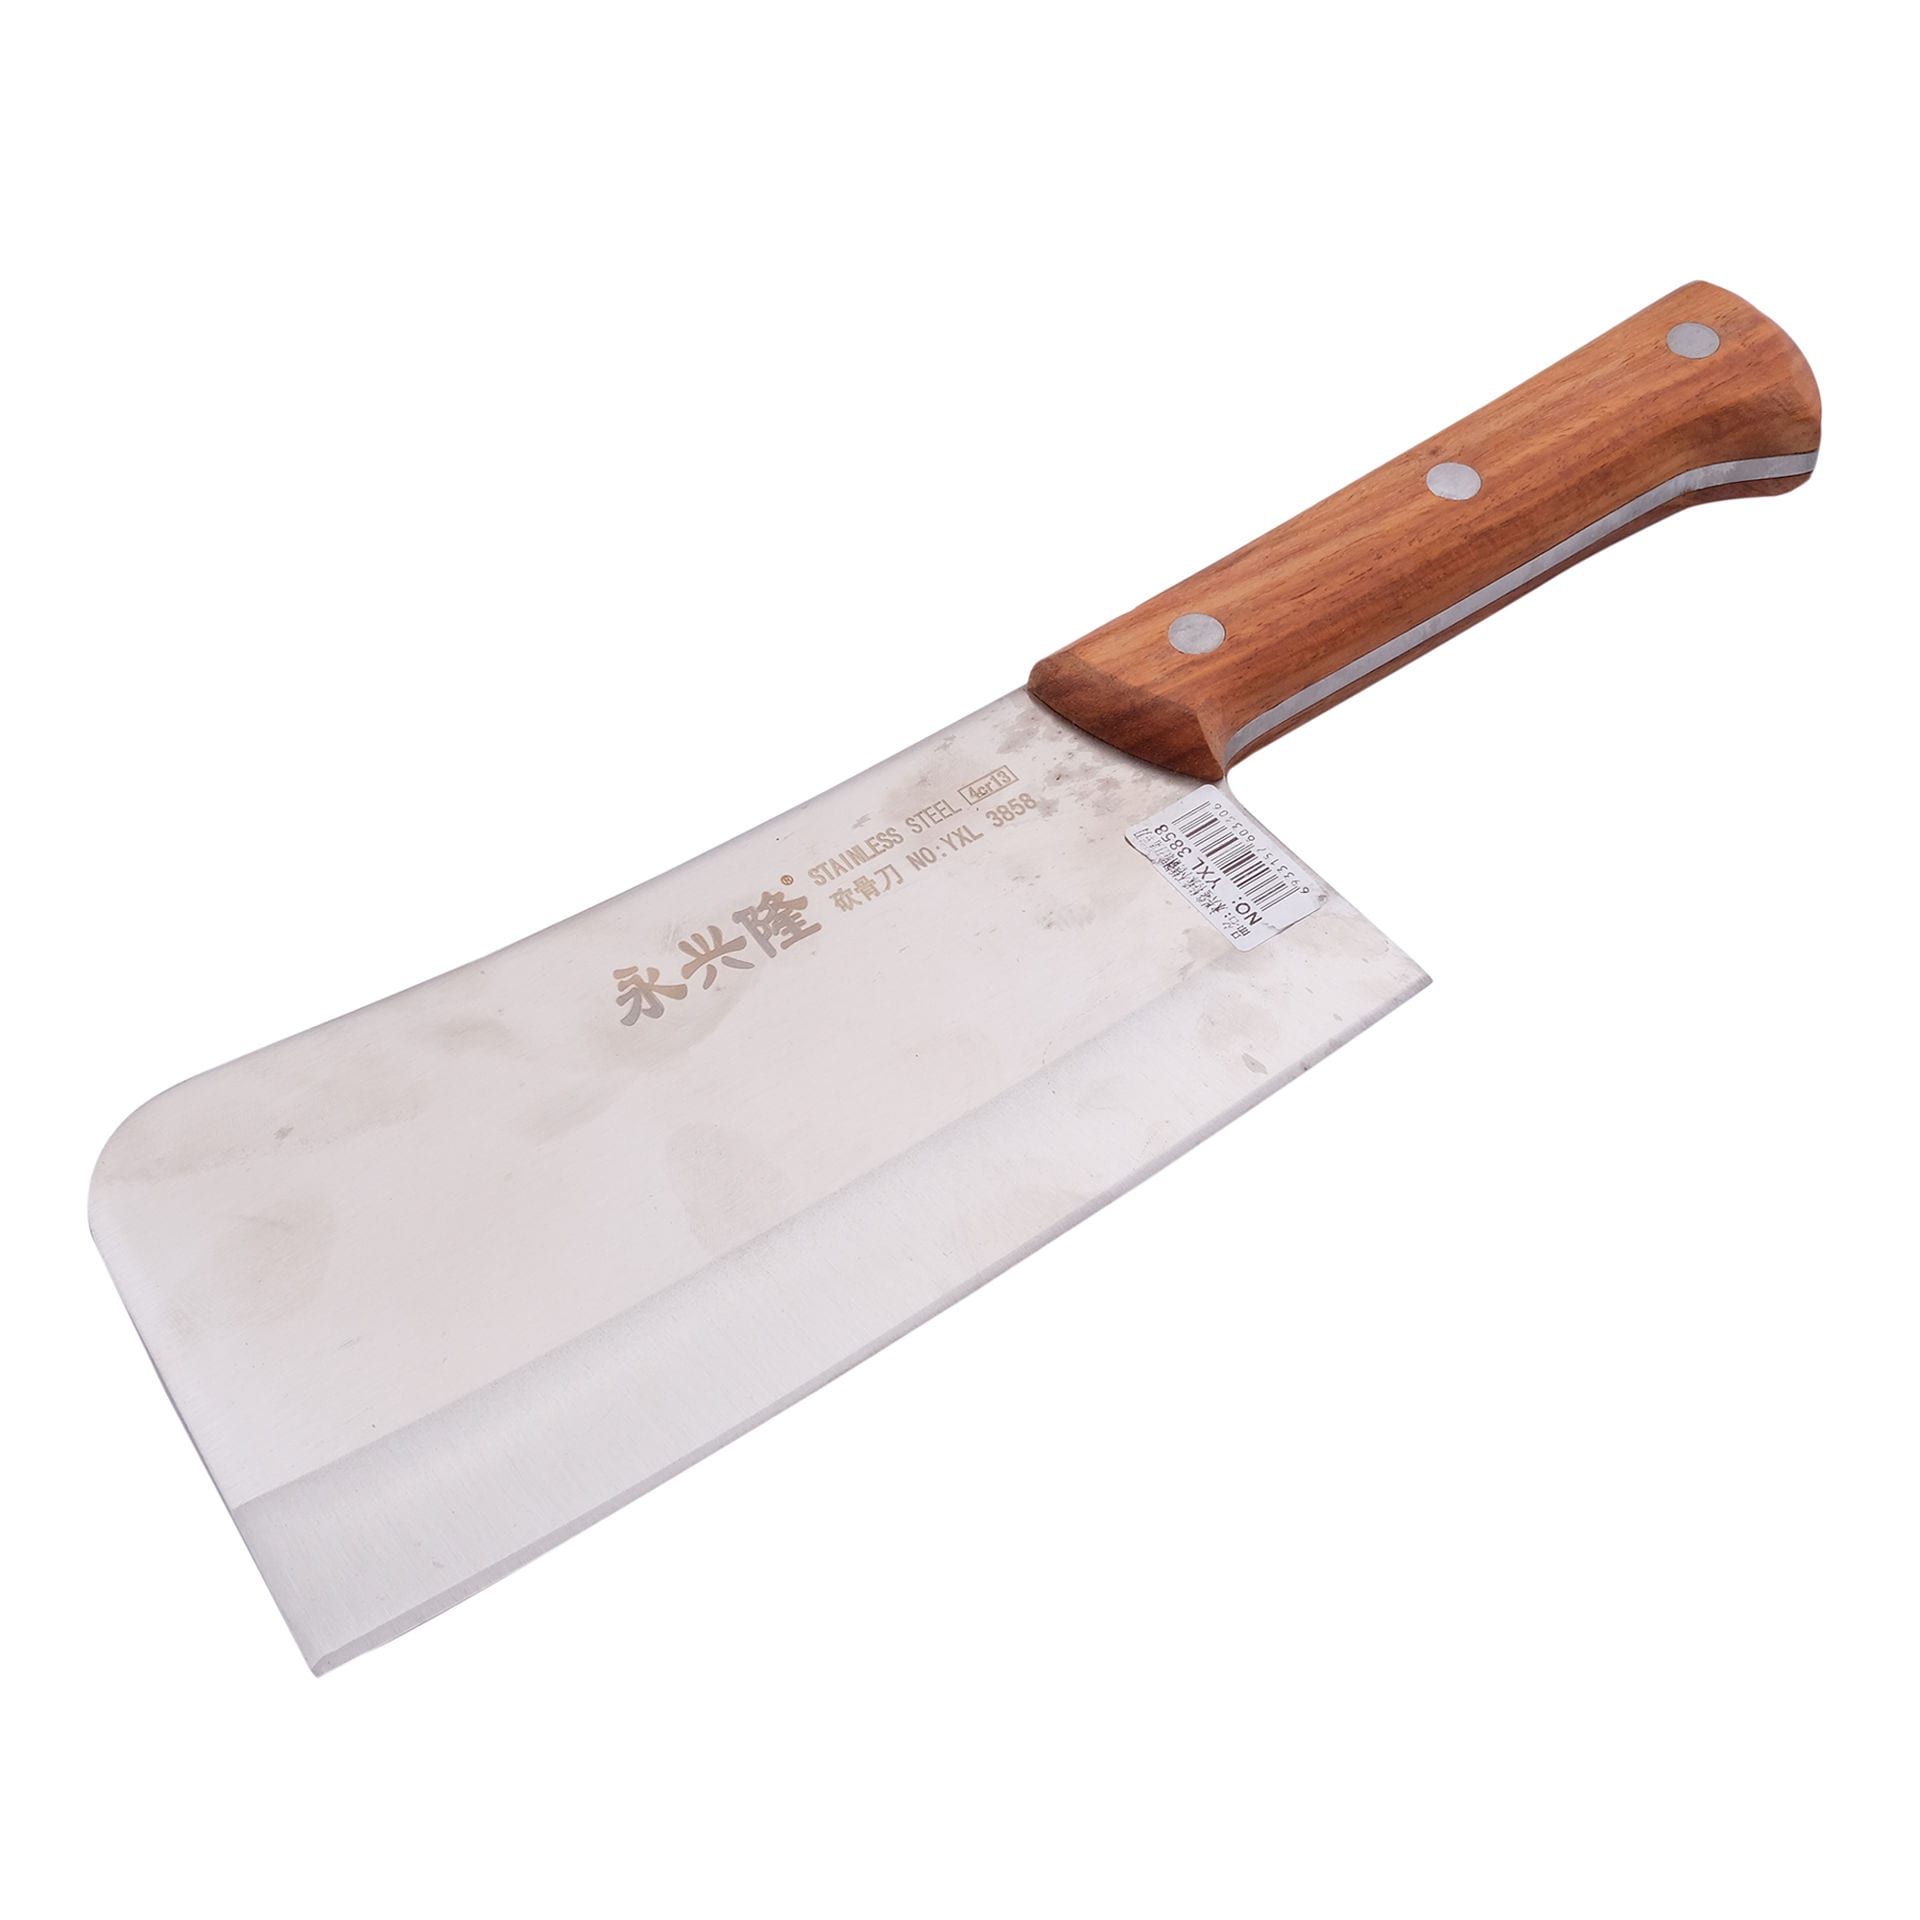 https://assets.dragonmart.ae//pictures/0639548_4cr13-stainless-steel-heavy-knife-with-wooden-handle-silver-brown.jpeg